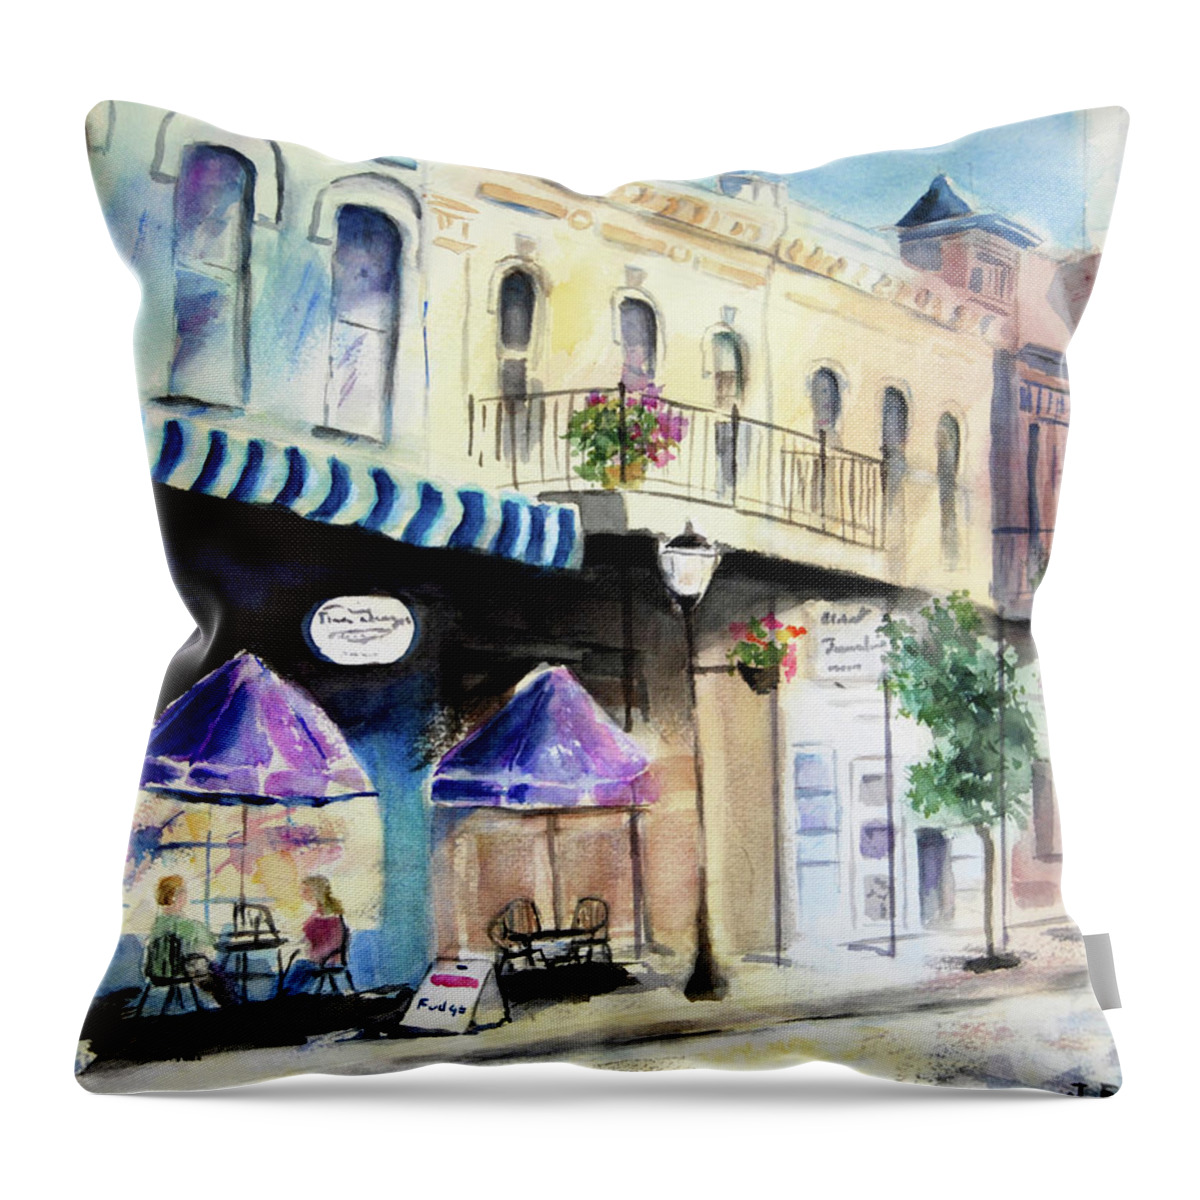 Cityscape Throw Pillow featuring the painting Enjoying Dauphin Street by Jerry Fair